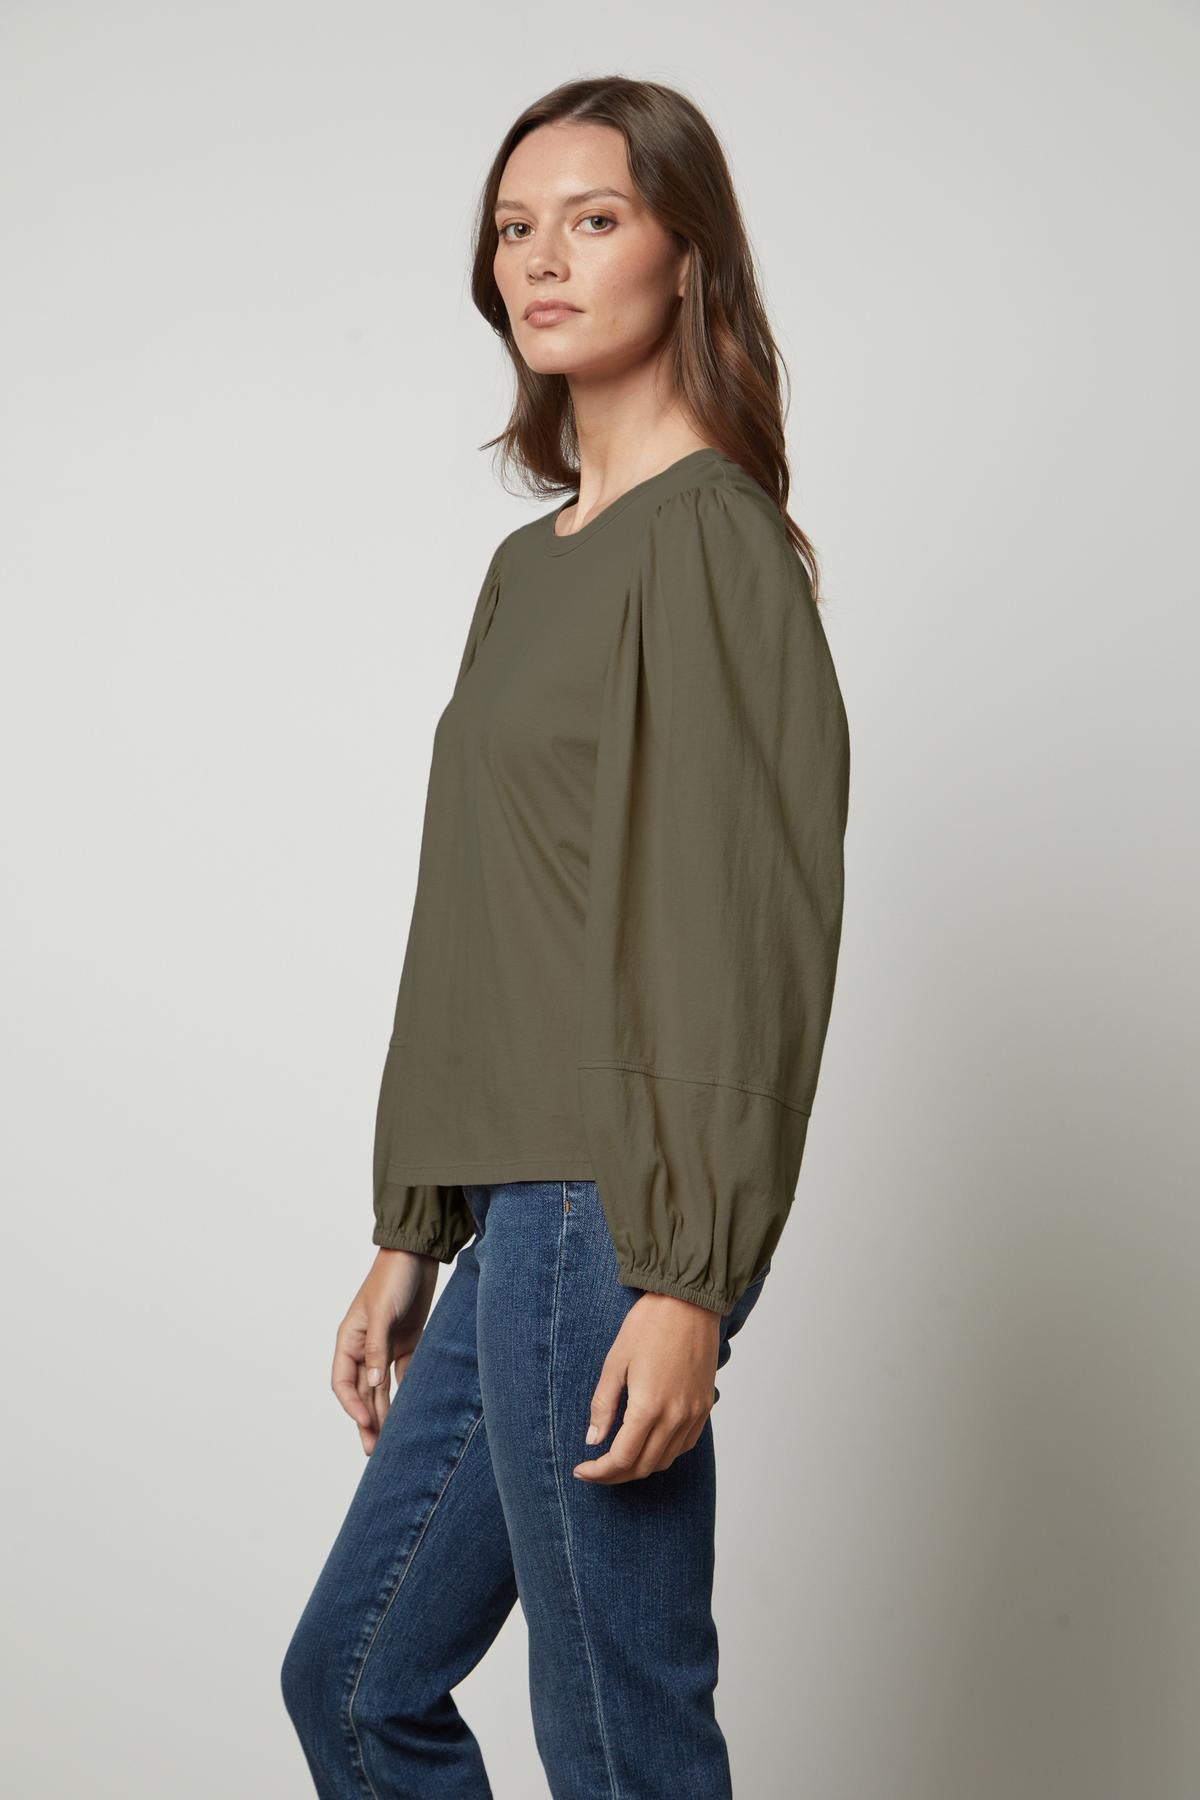 The JETTY CREW NECK TEE by Velvet by Graham & Spencer in olive green with a banded neckline.-35660271583425